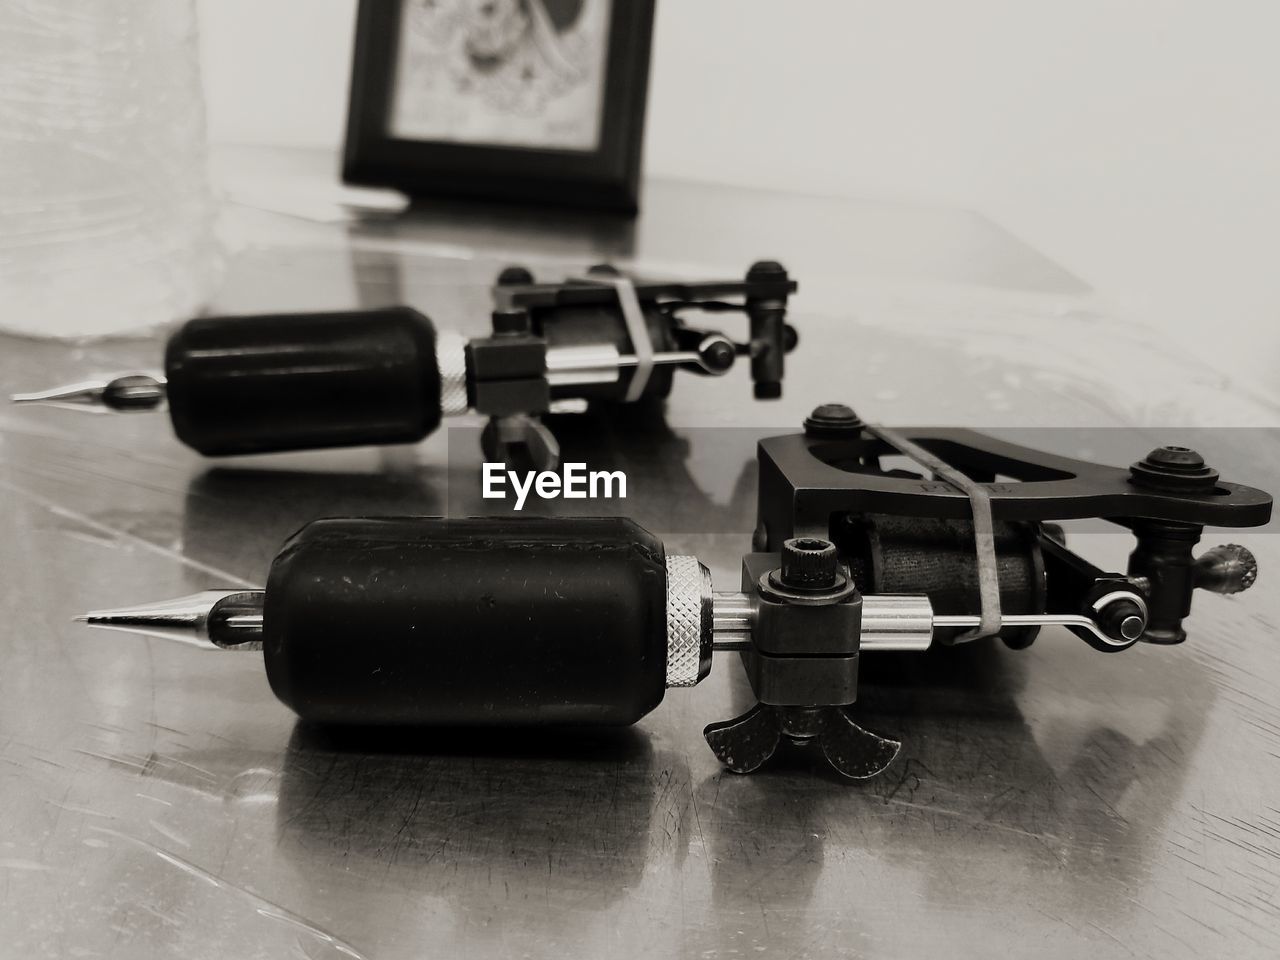 CLOSE-UP OF CAMERA ON TABLE WITH EYEGLASSES